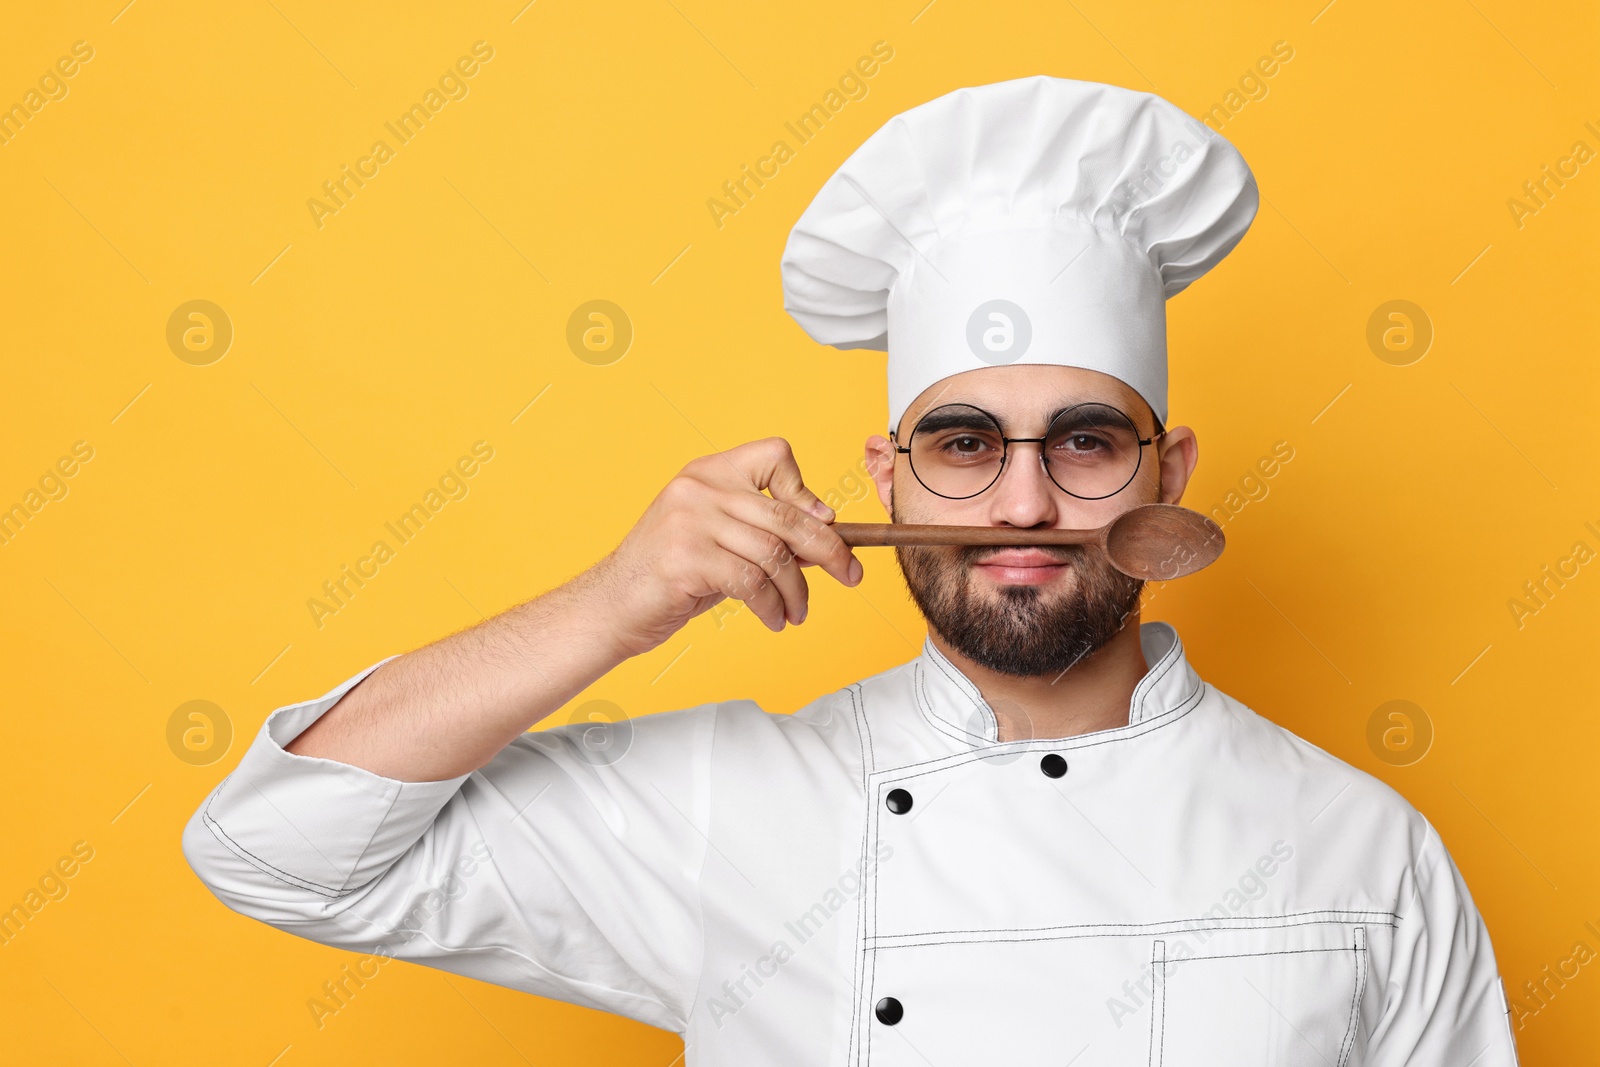 Photo of Professional chef with wooden spoon having fun on yellow background